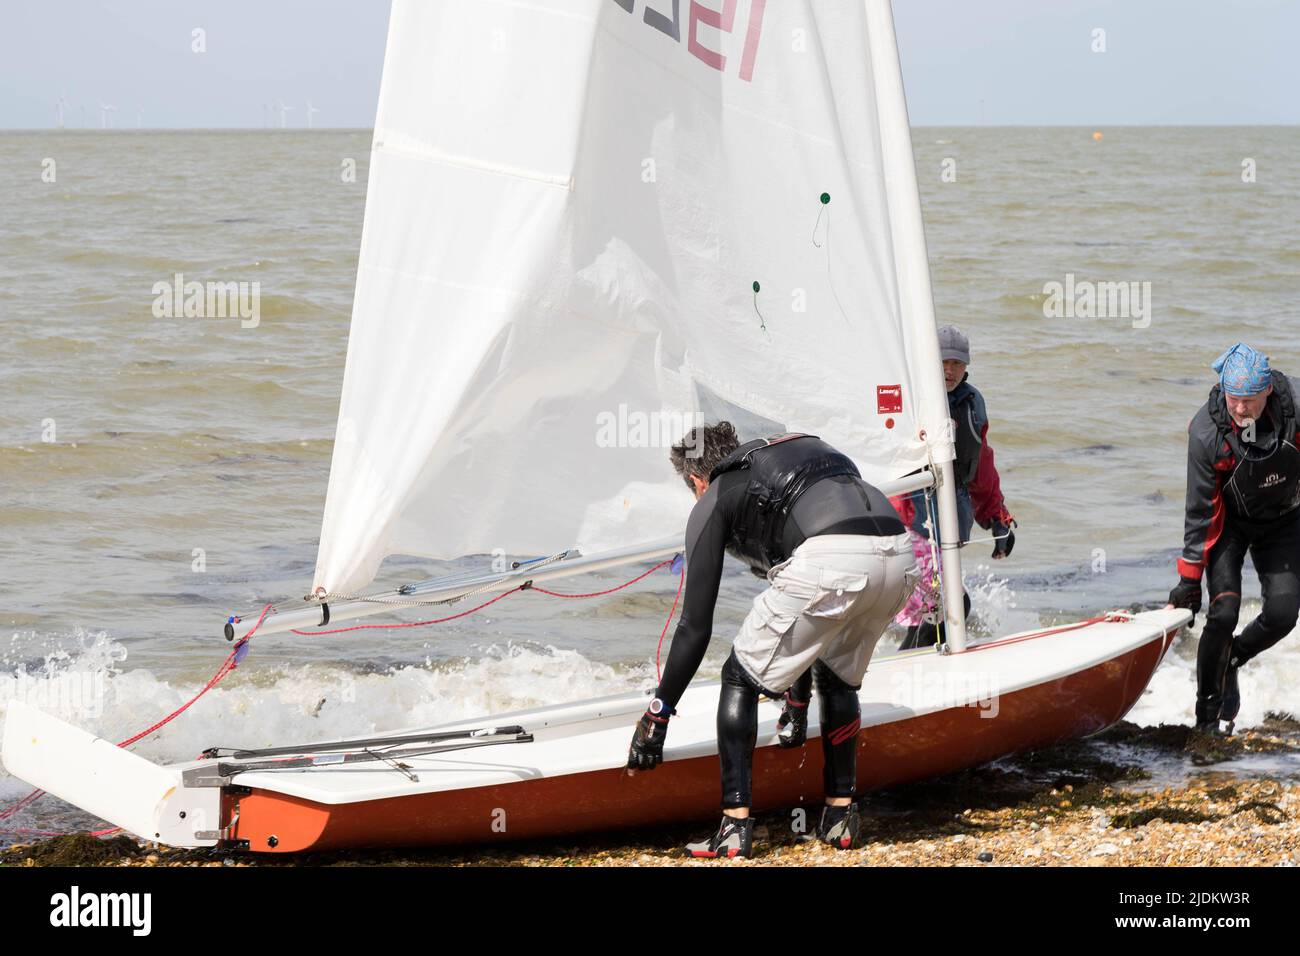 Tankerton 60 minutes sailing race 'Commodore 3 & 4' took place under choppy water on a windy summer afternoon today Stock Photo